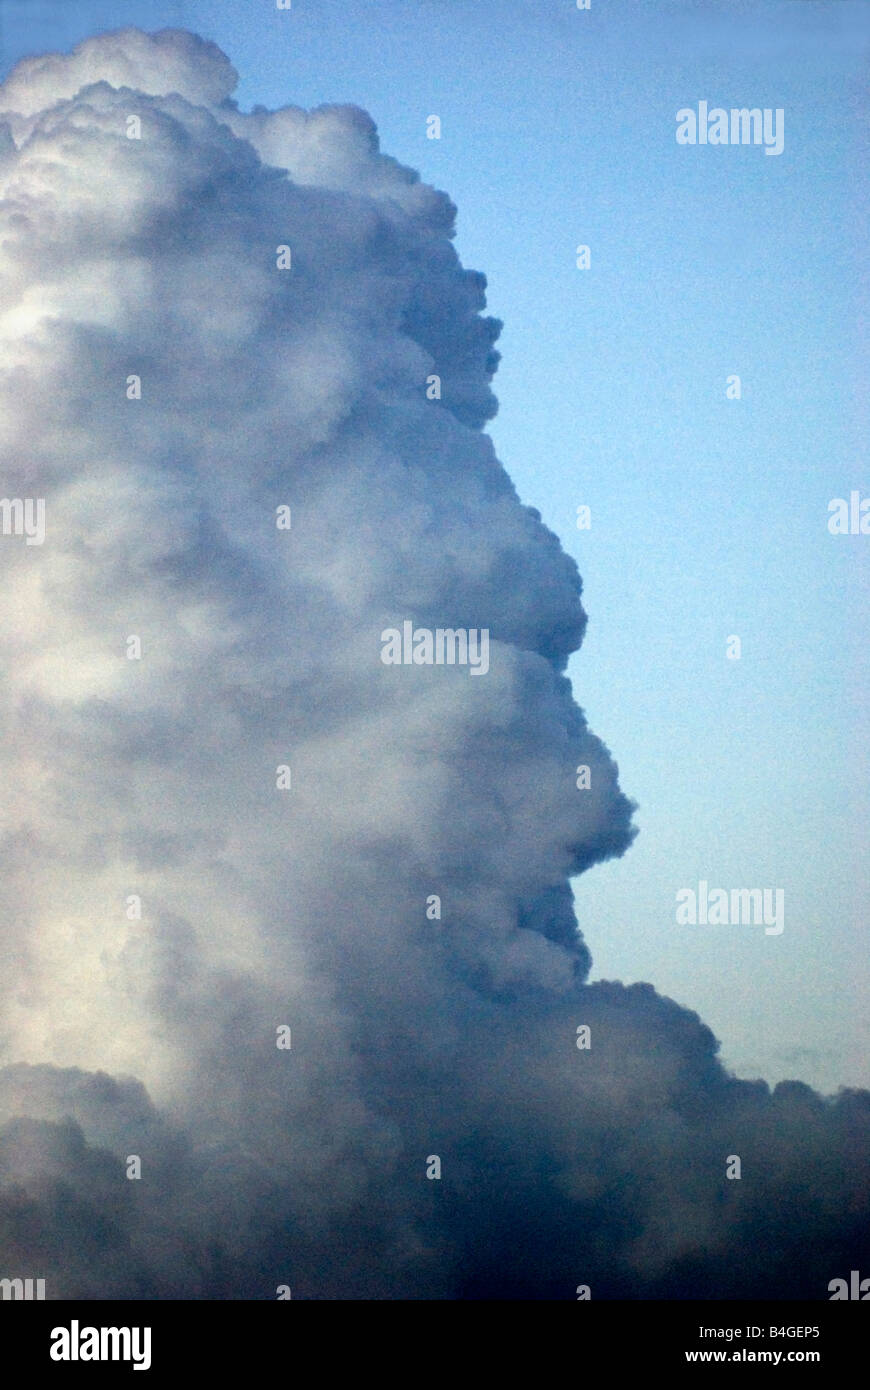 face of old man in cloud formation Stock Photo